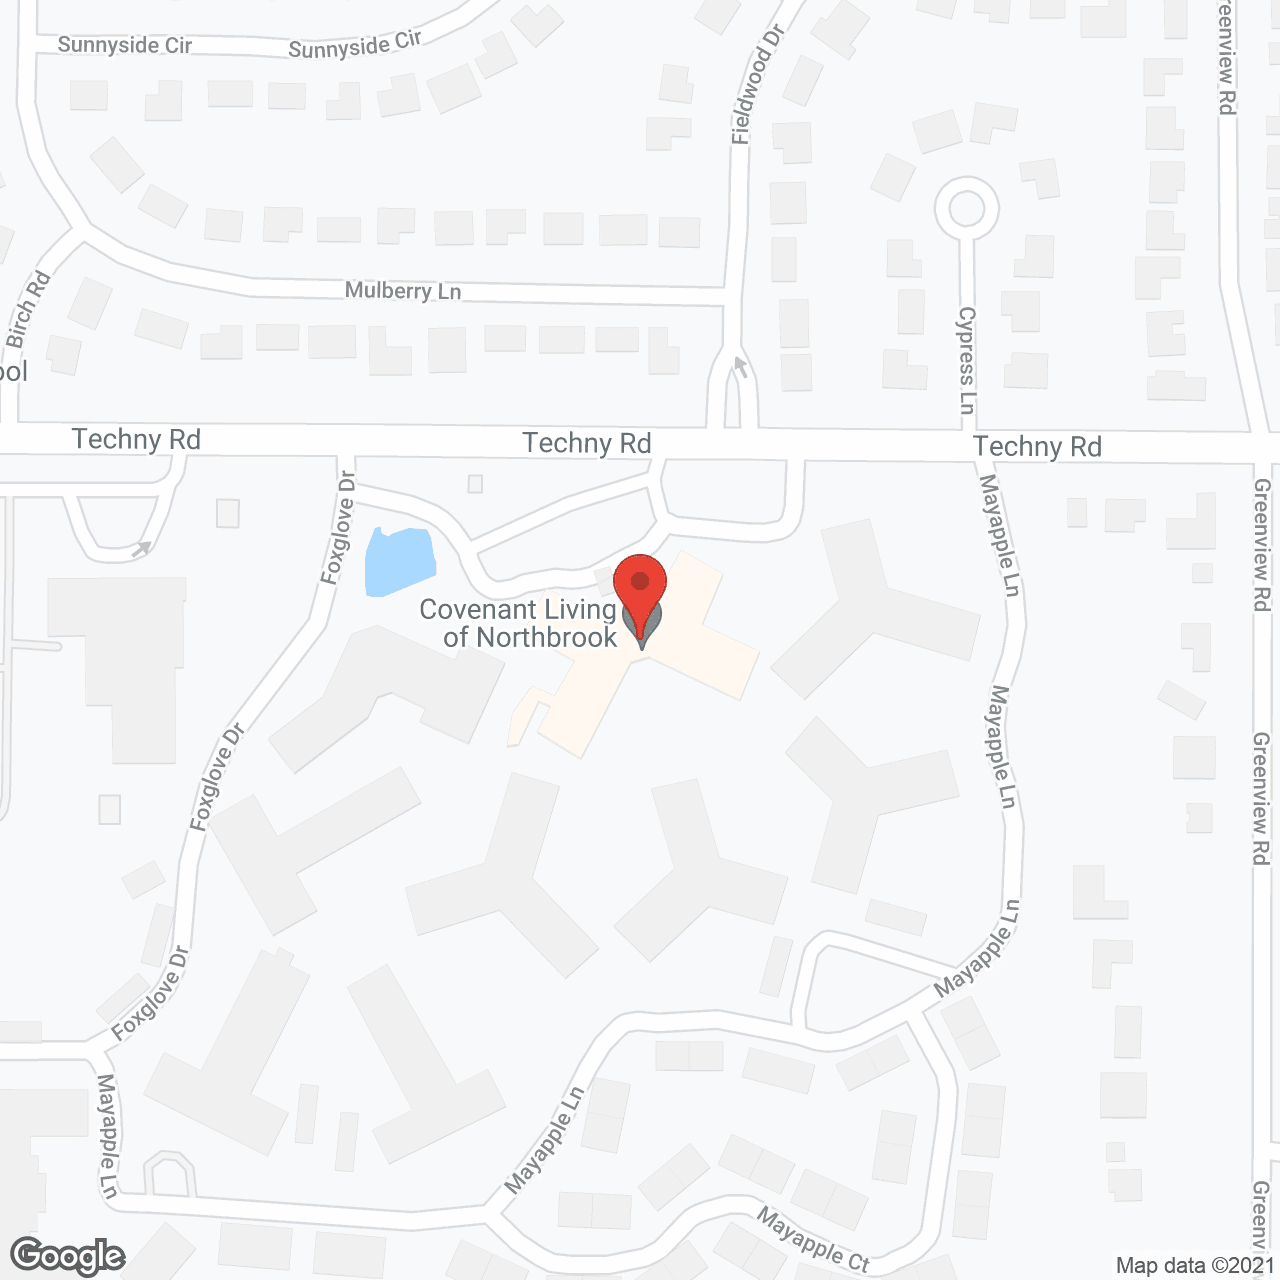 Covenant Village of Northbrook in google map